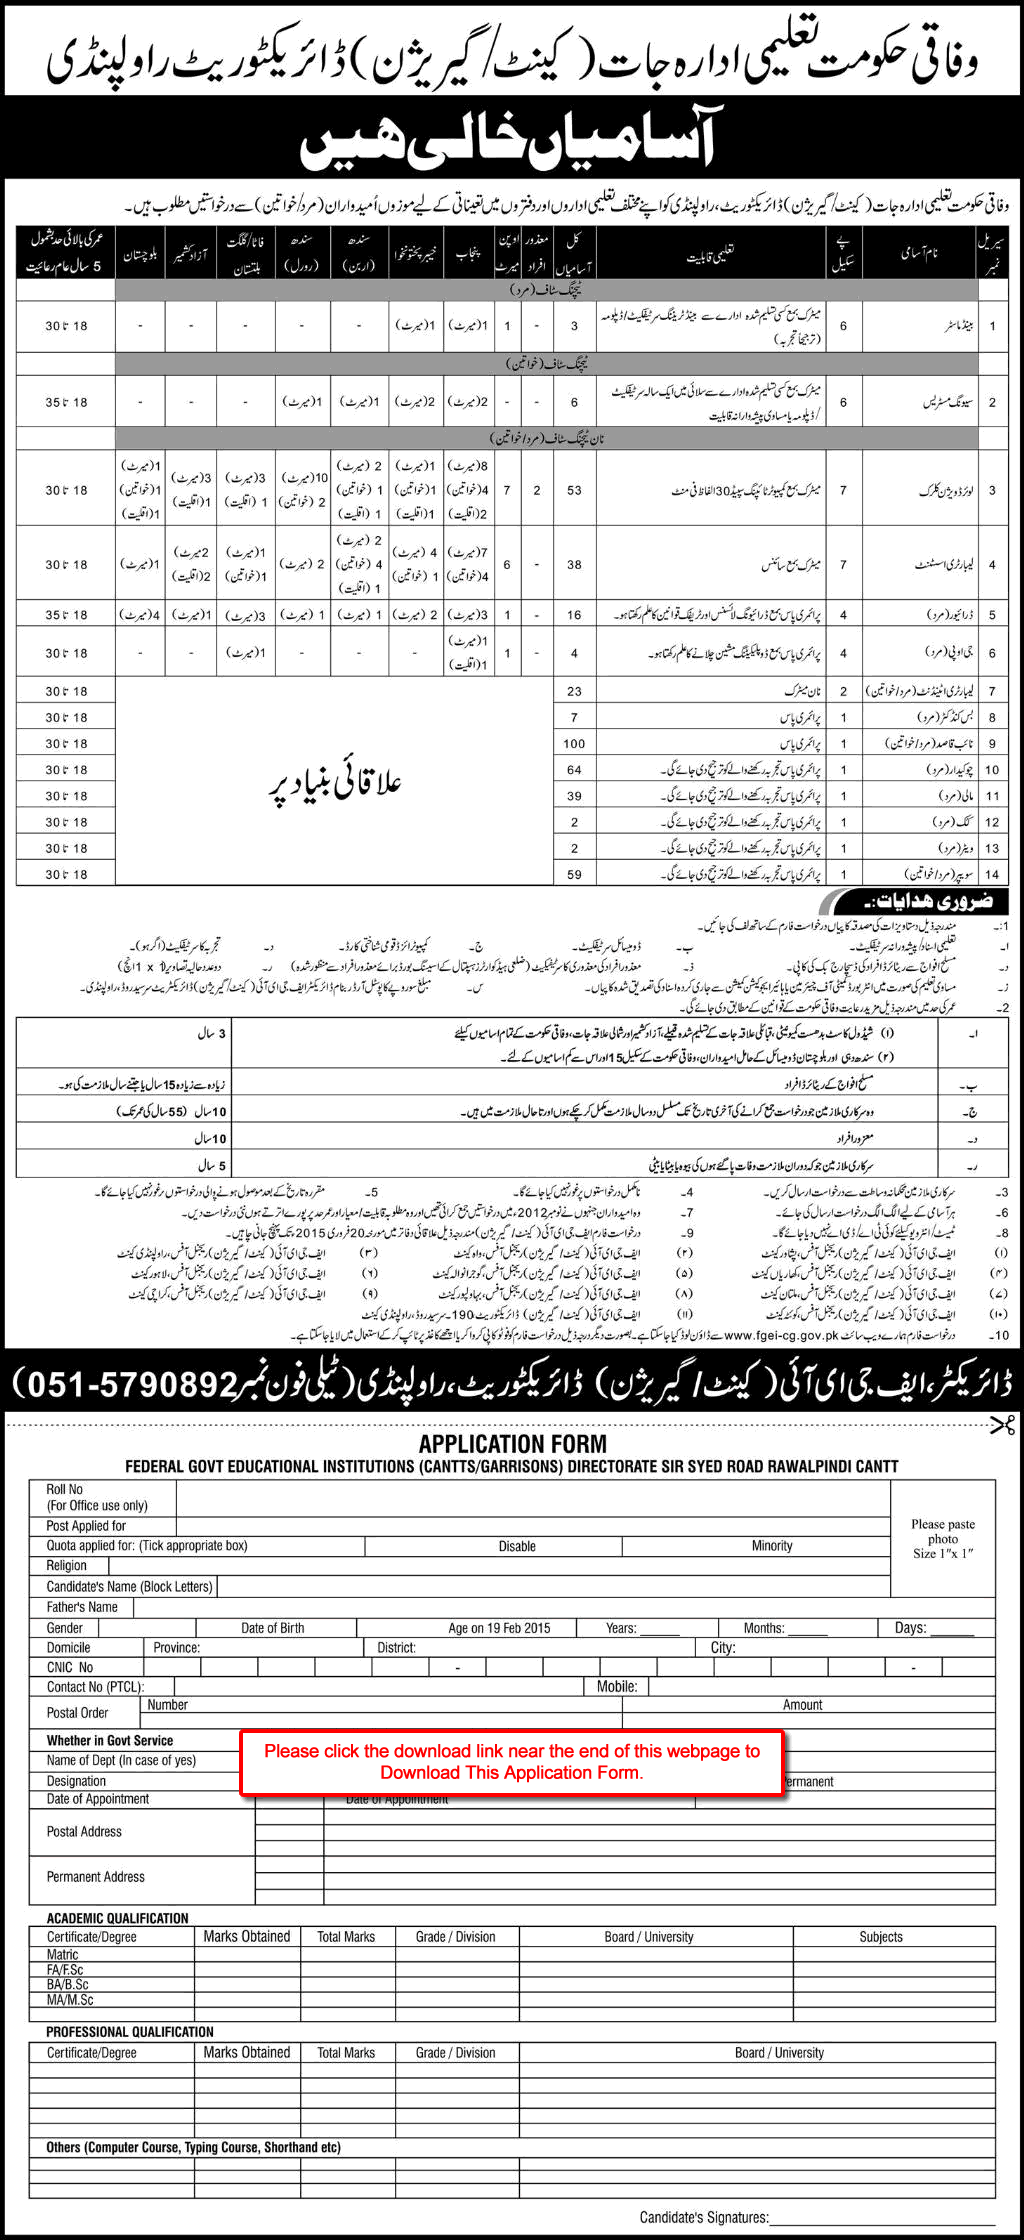 www.fgei-cg.gov.pk Jobs 2015 Federal Government Education Institutes Application Form Download